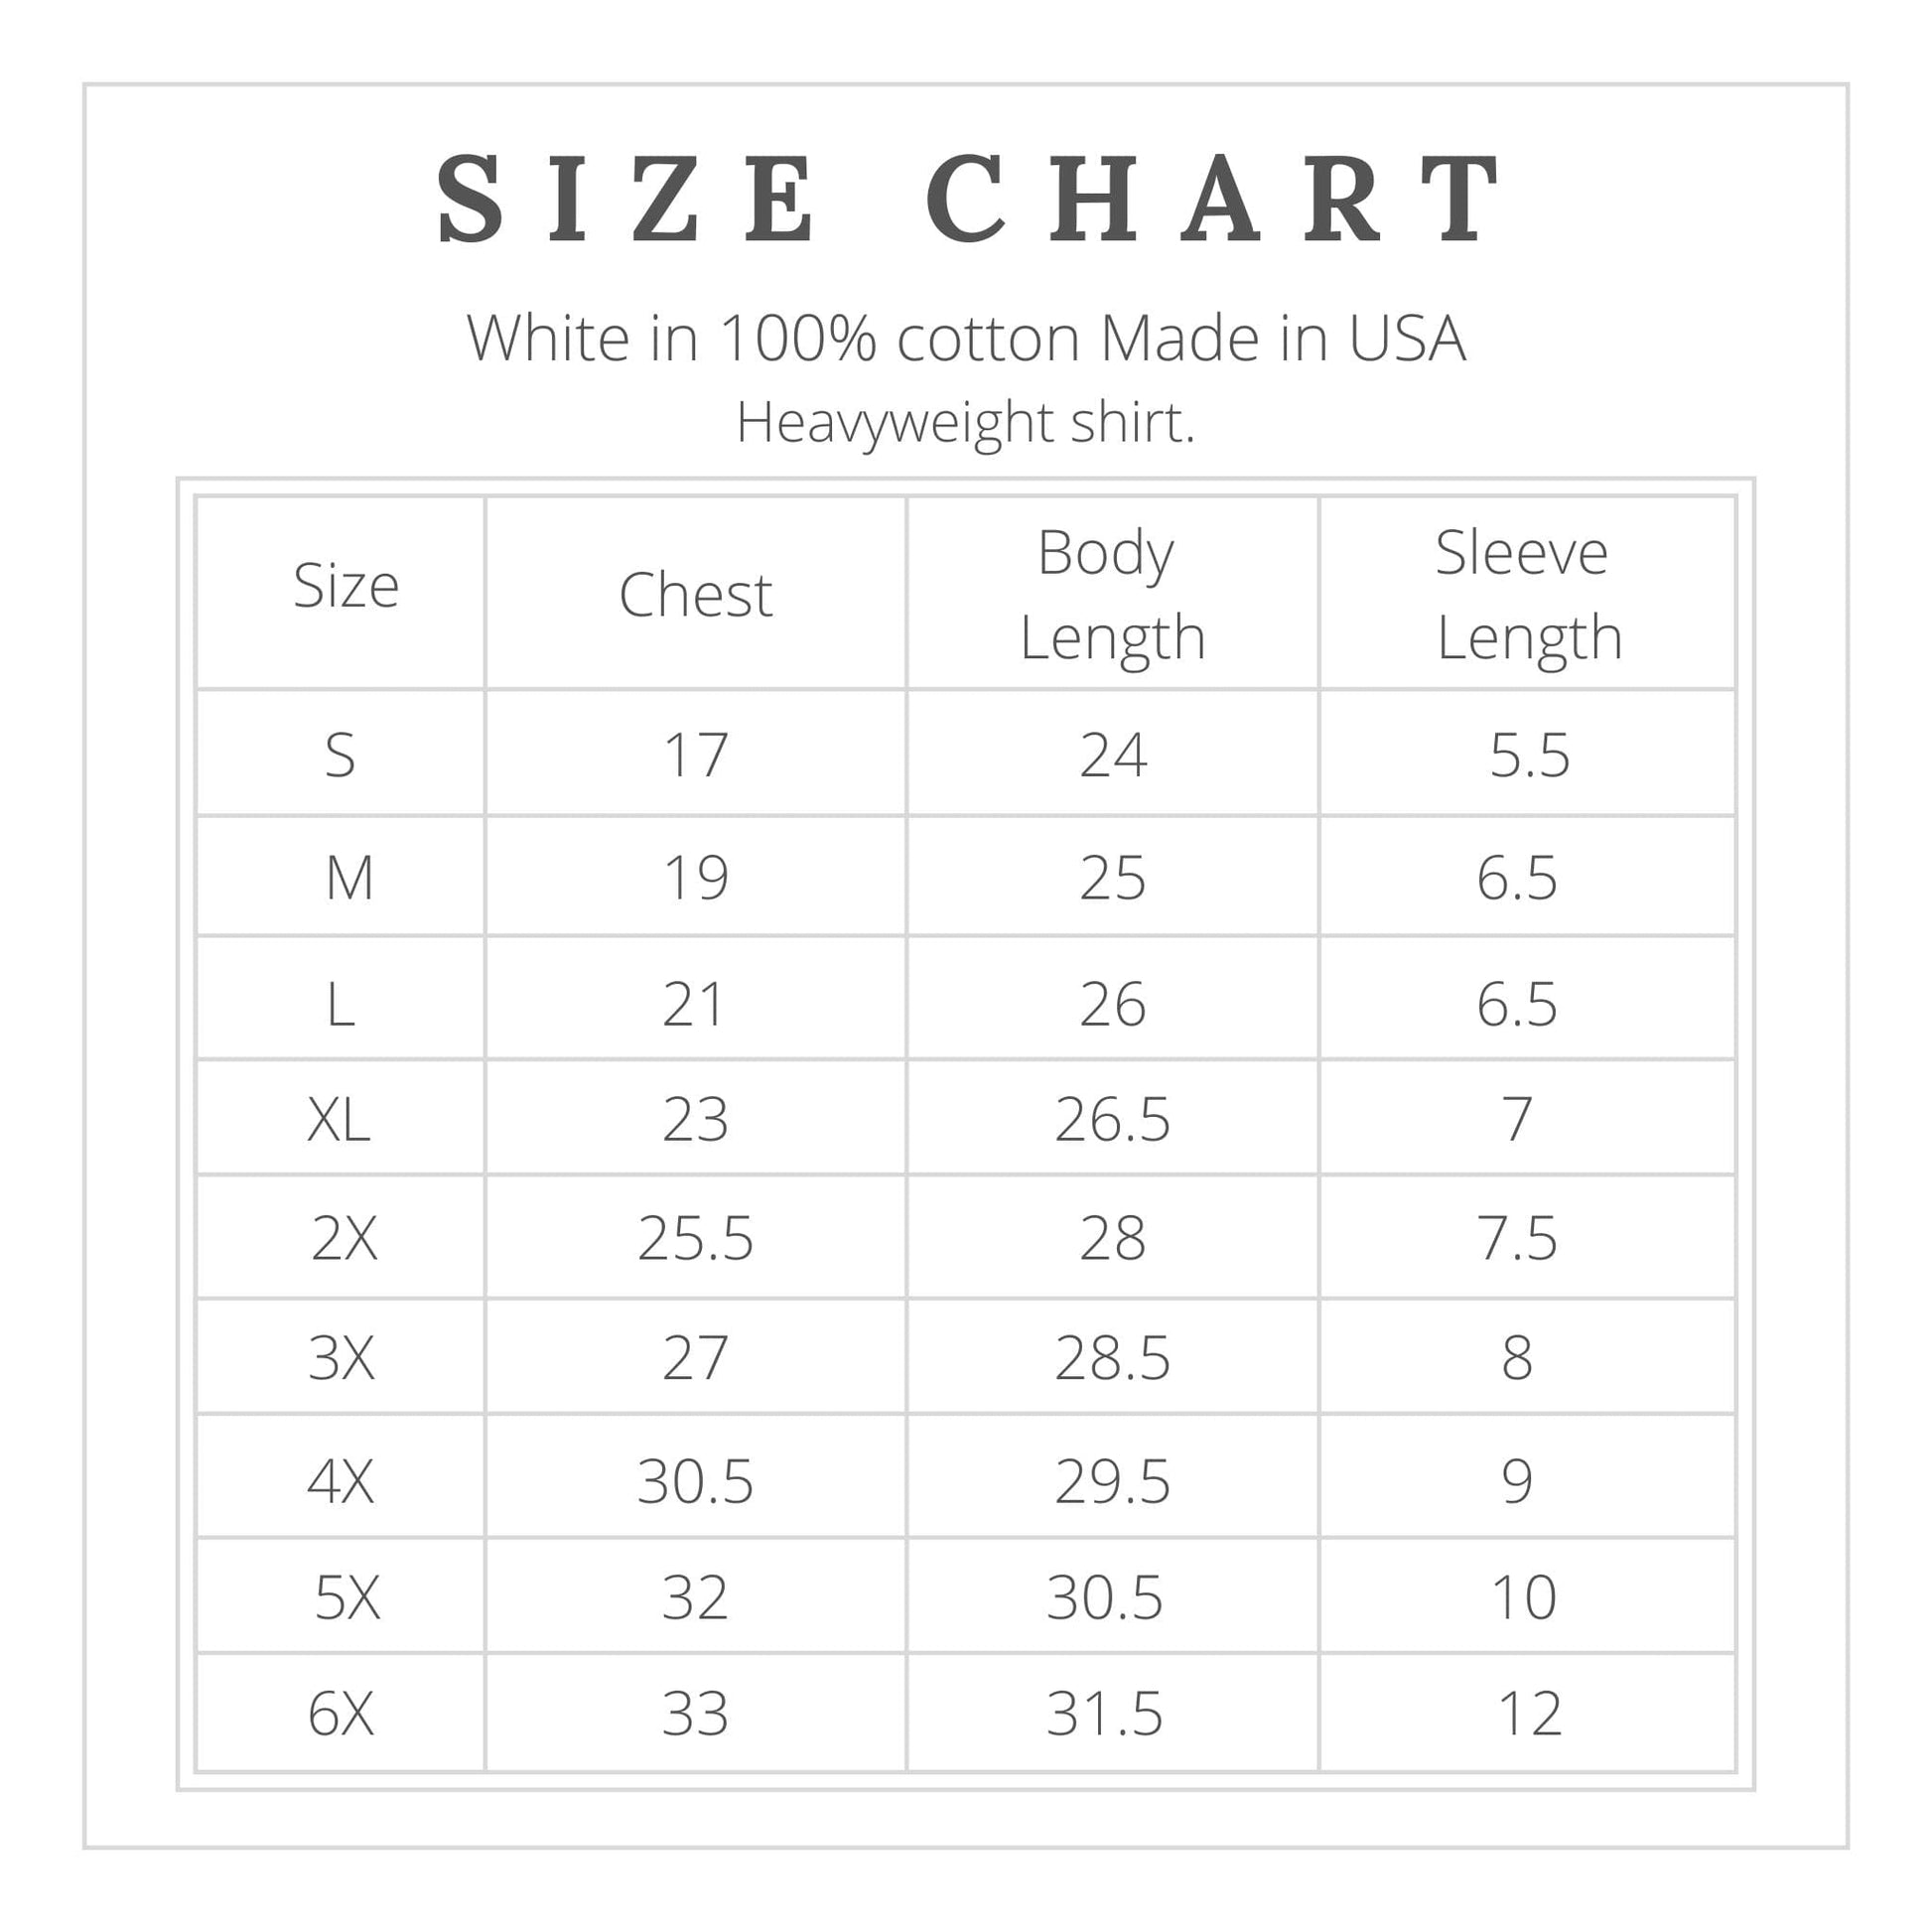 Size chart of the Made in USA shirt of "We hold these truths - July 4, 1776” T-shirt from The History List store